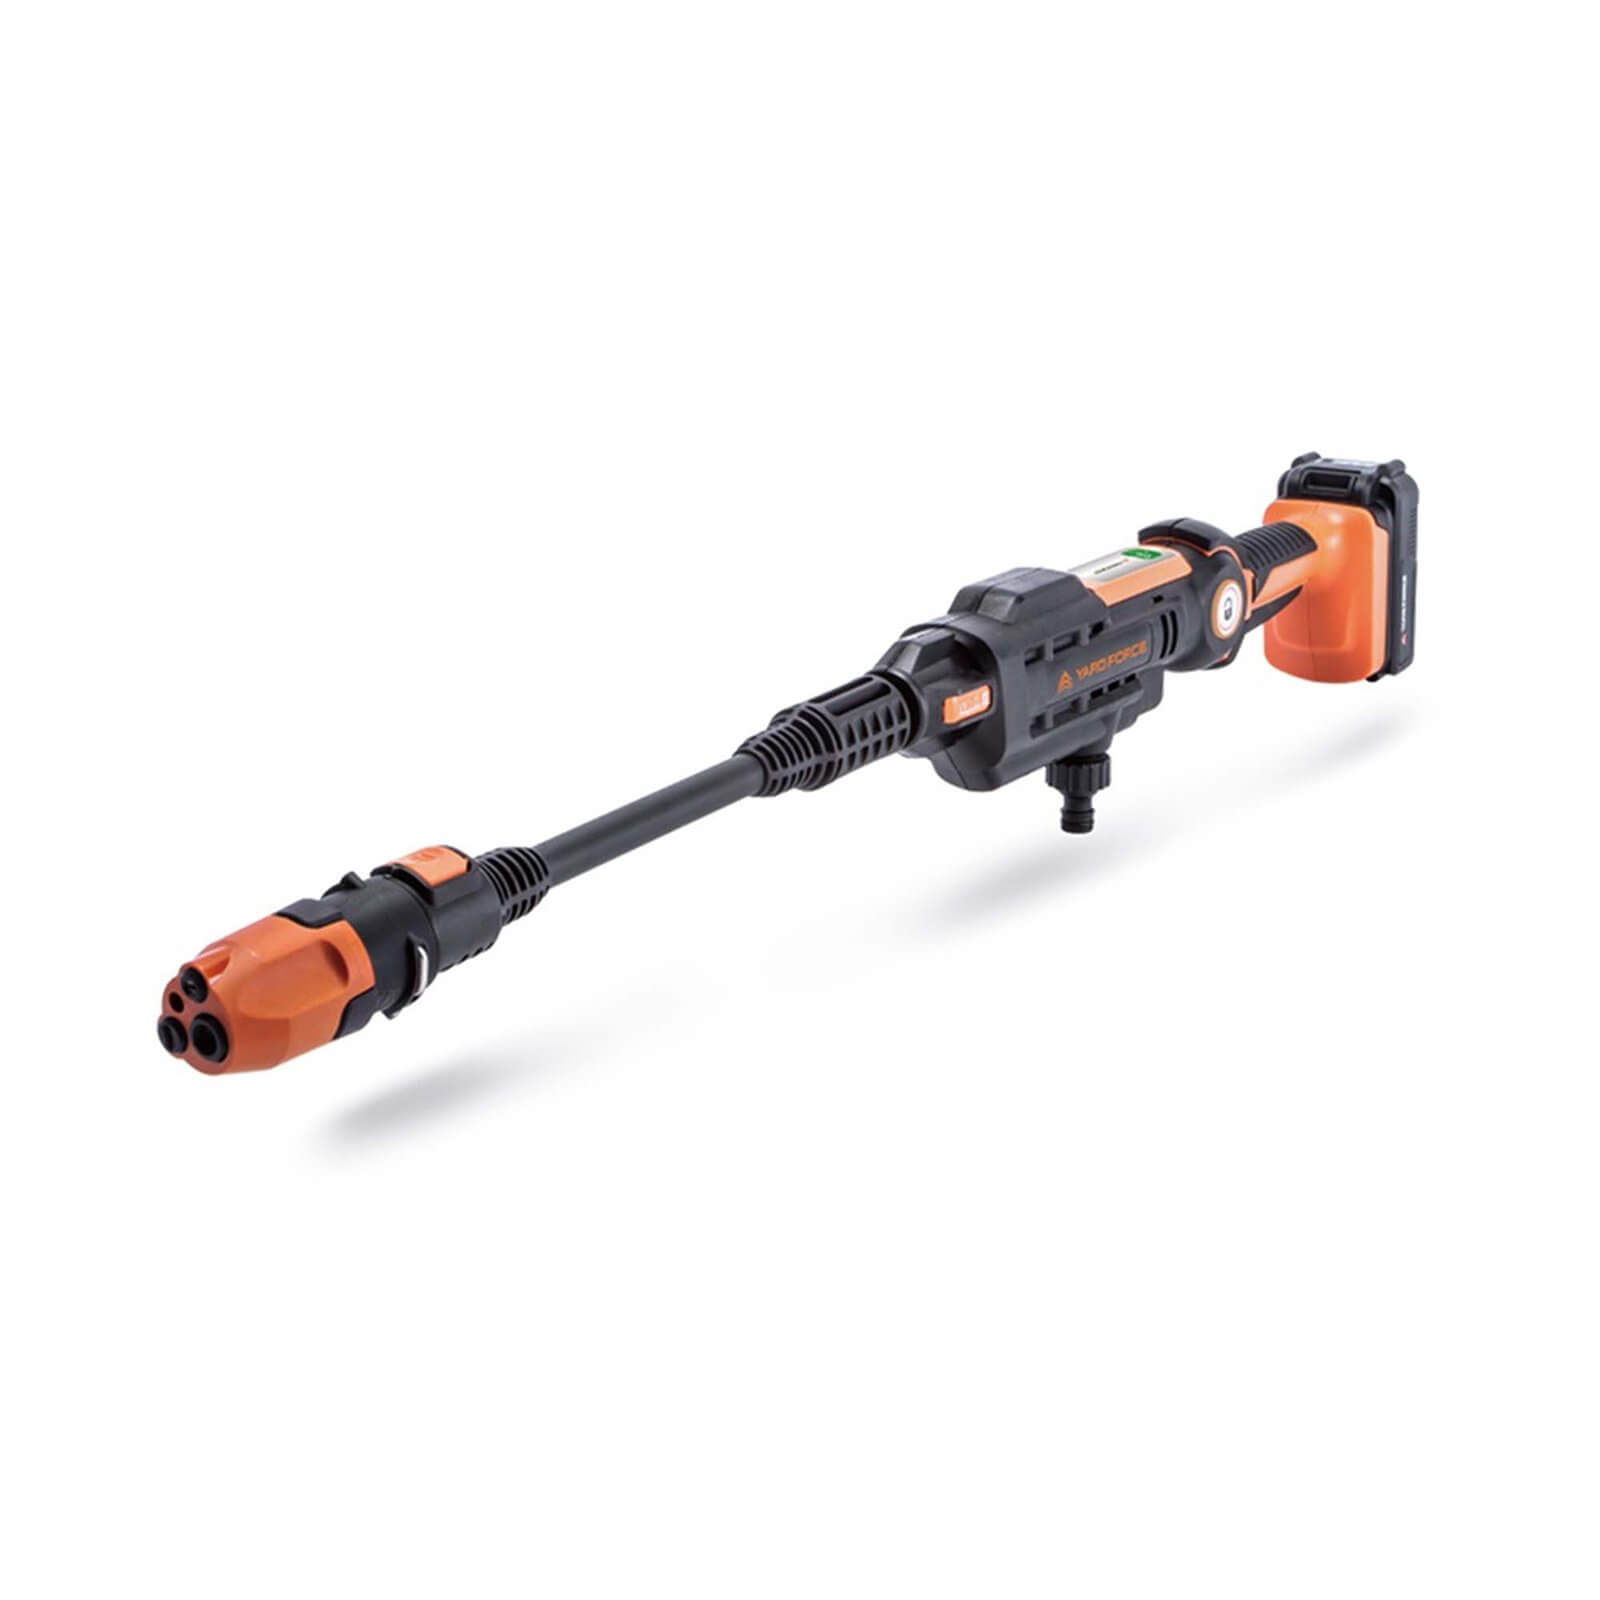 Yard Force 22Bar 20V Aquajet Cordless Pressure Cleaner with 2.5Ah Lithium-Ion Battery, Charger and Accessories